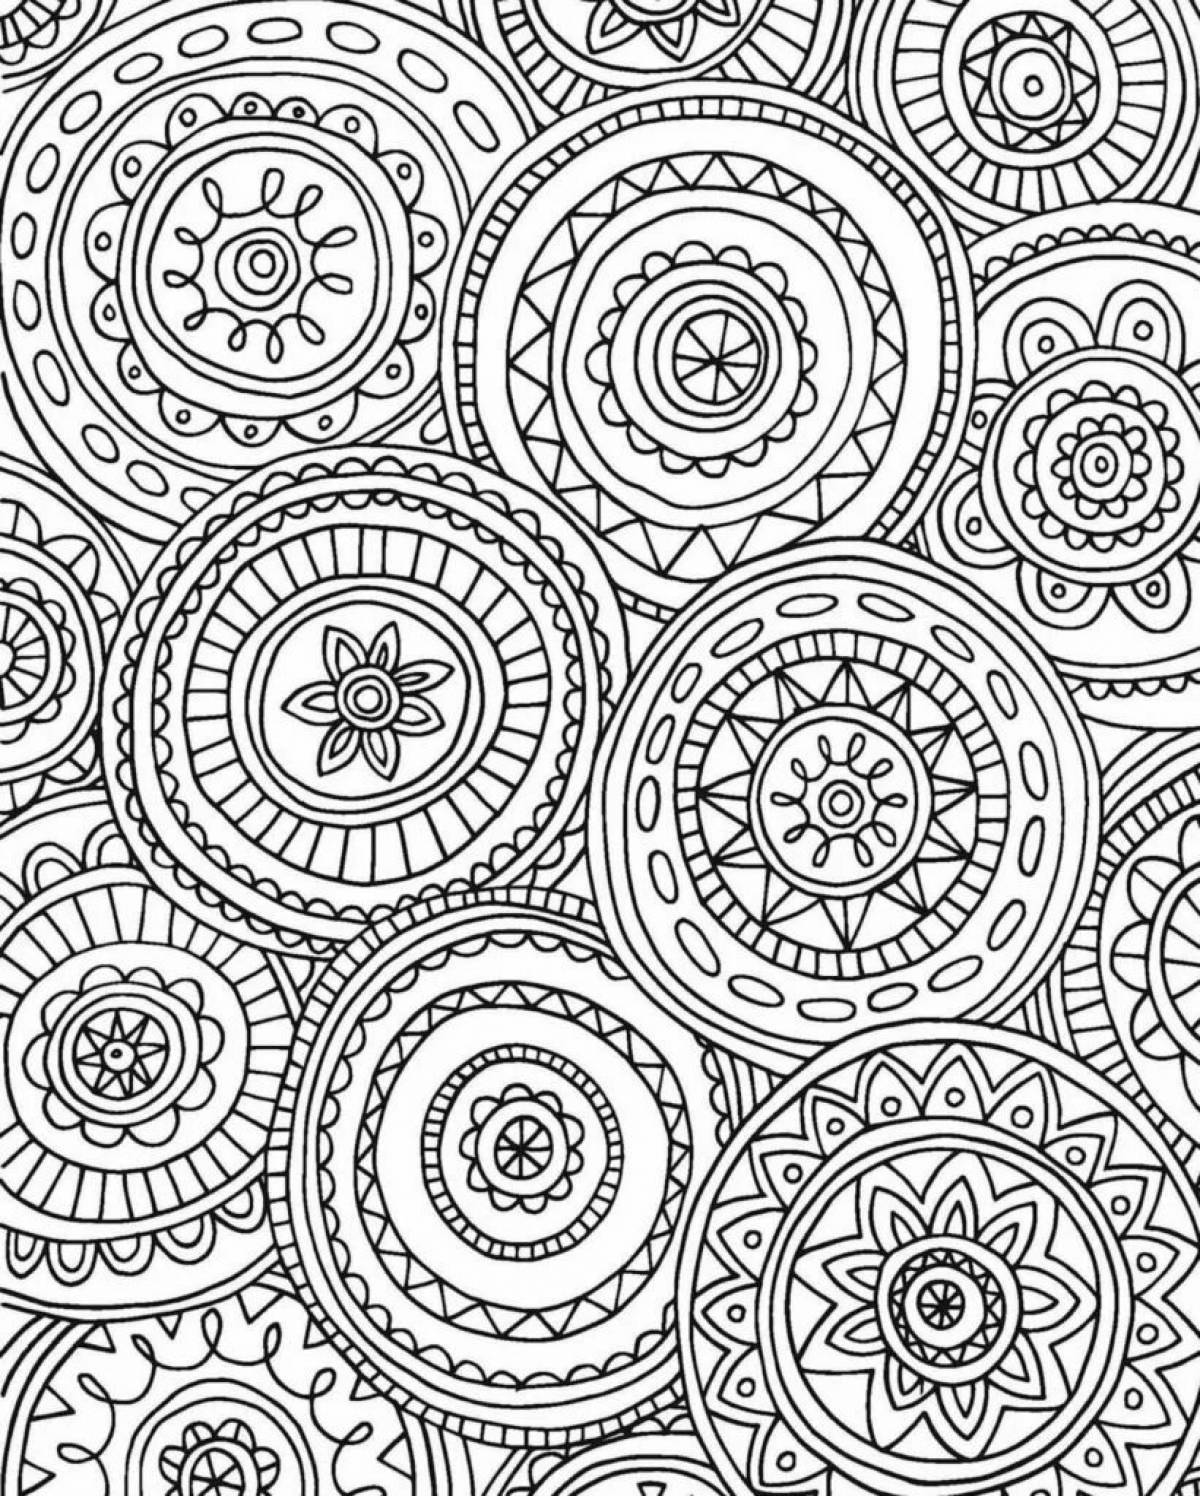 Coloring book with luxurious patterns